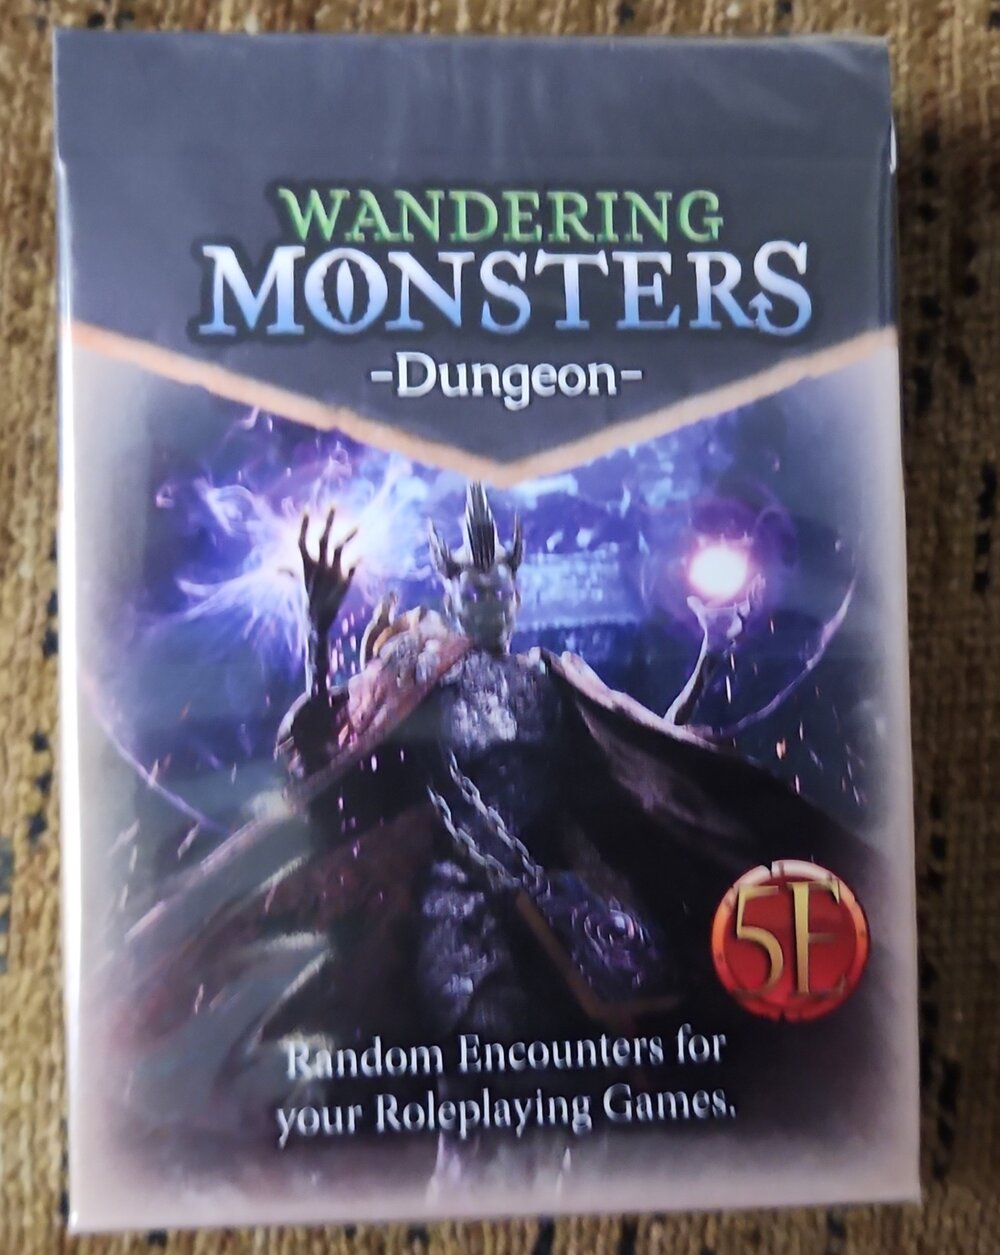 Wandering Monsters Dungeon 52 card deck (*See Per Order Flat Rate Shipping)